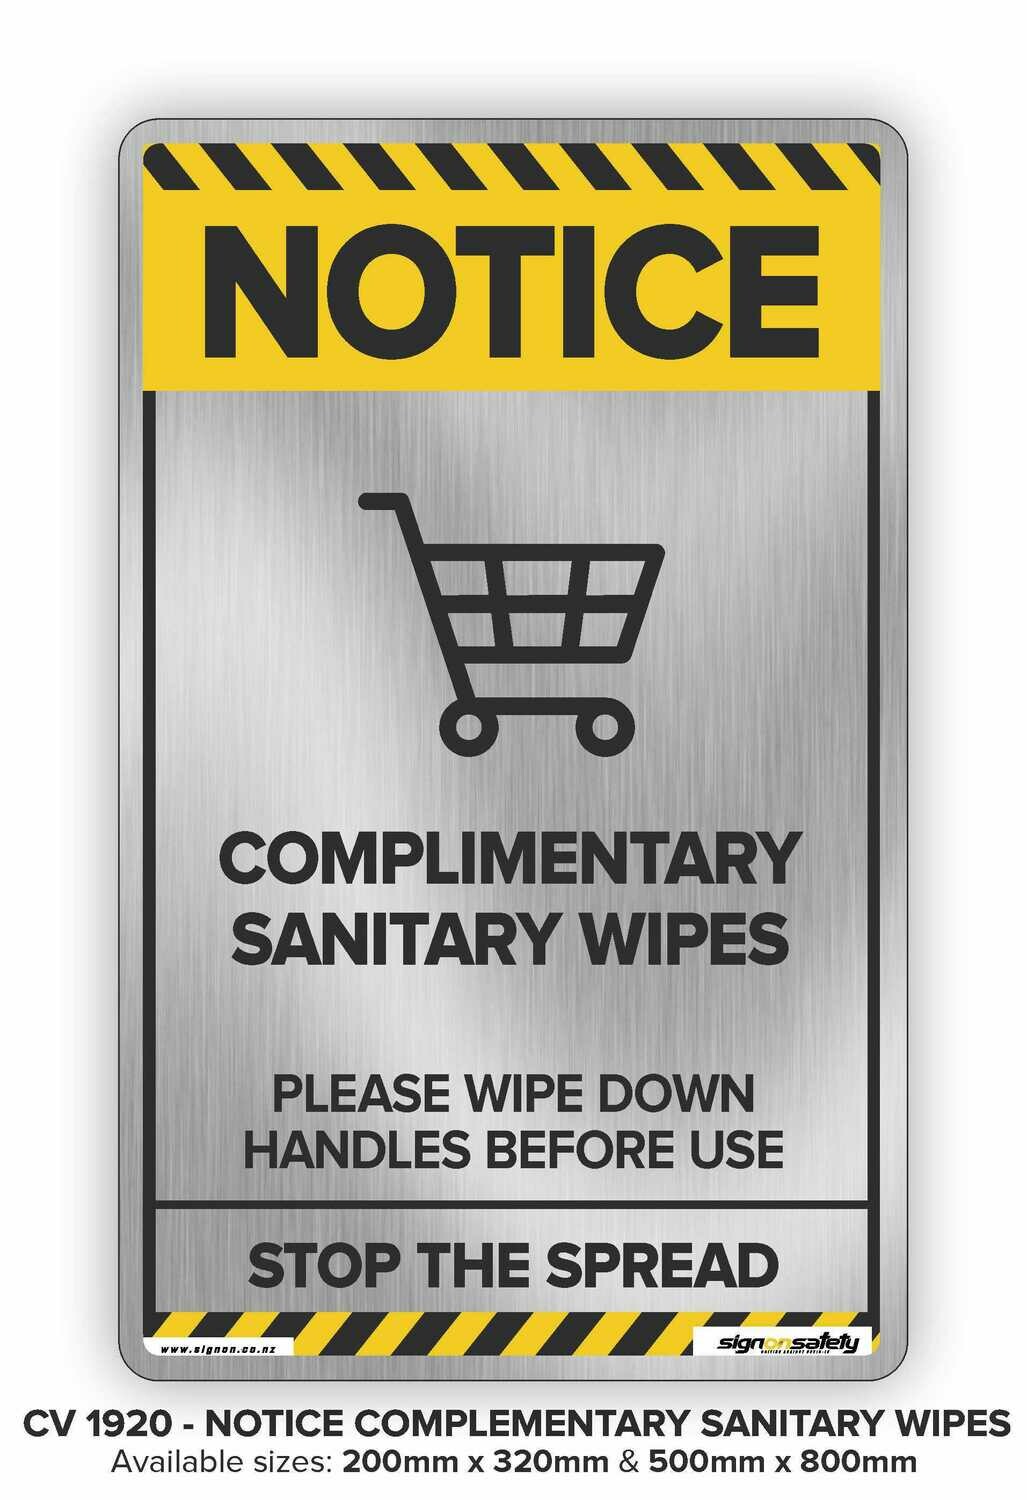 Notice - Complimentary Sanitary Wipes